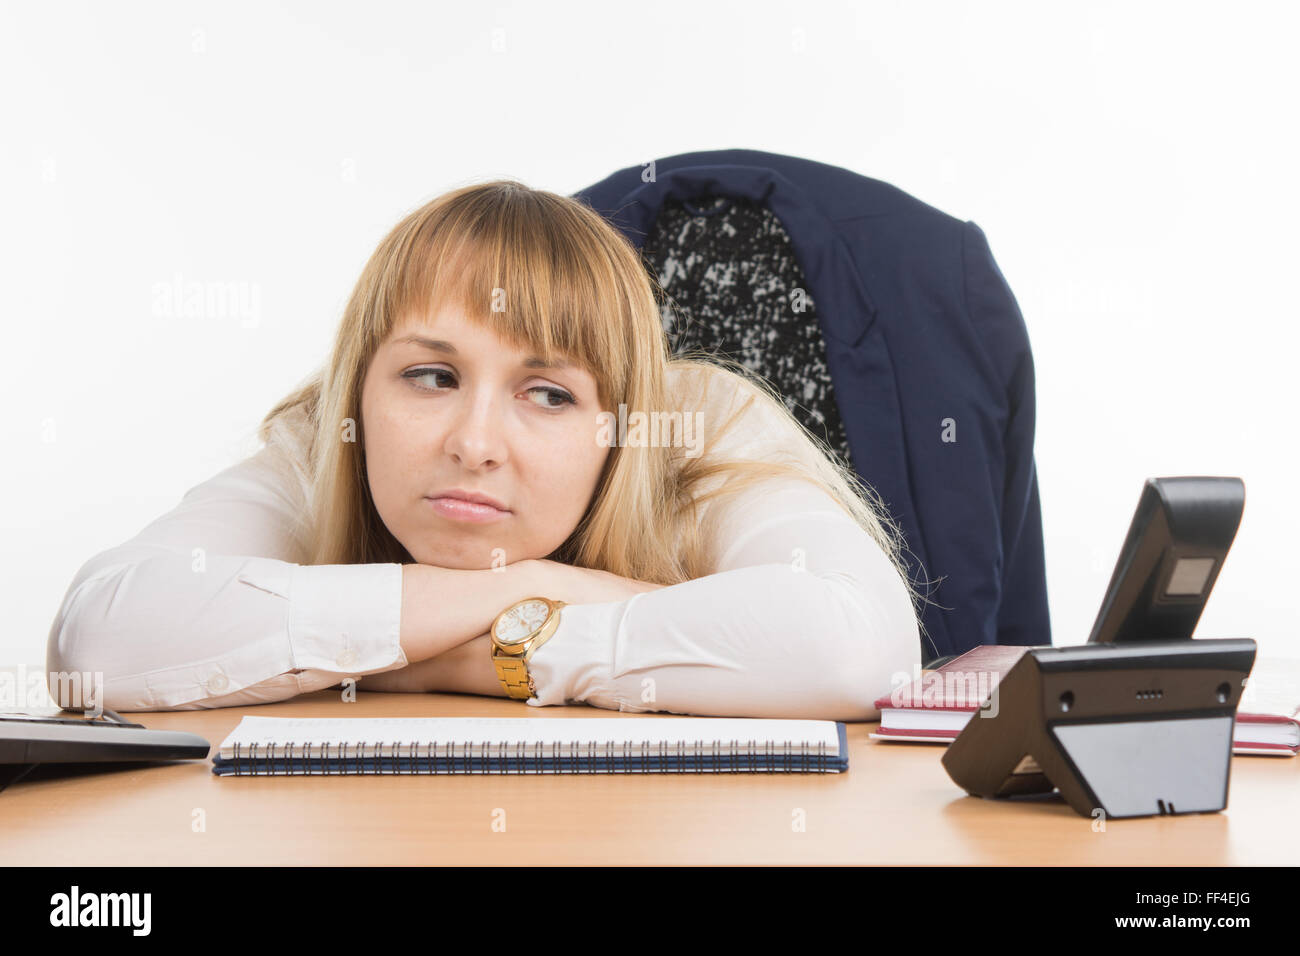 Office employee wearily and angrily looks at the phone rang Stock Photo